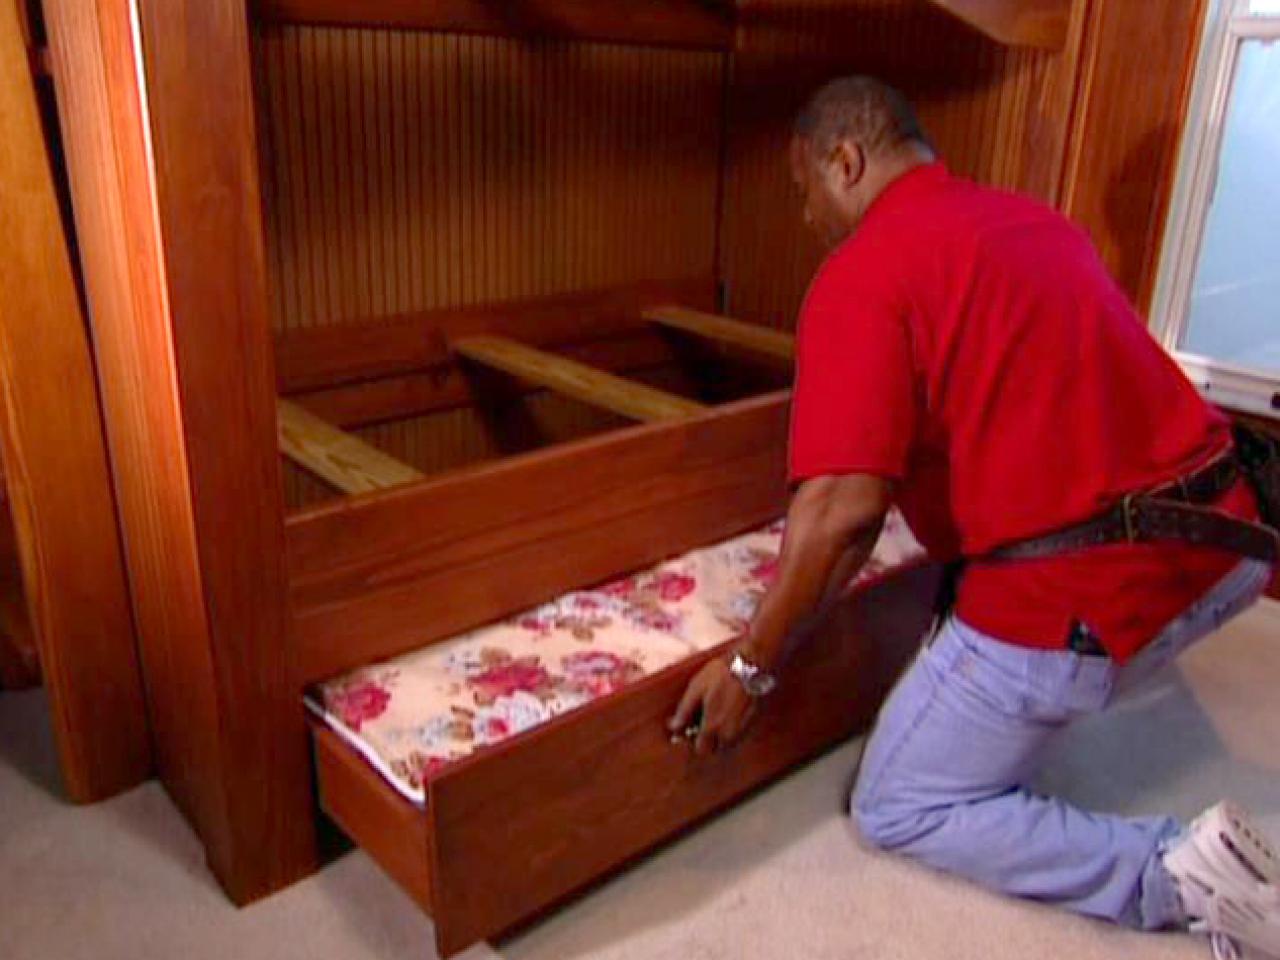 How To Build Custom Bunk Beds Tos, How To Build Bunk Beds With Drawers